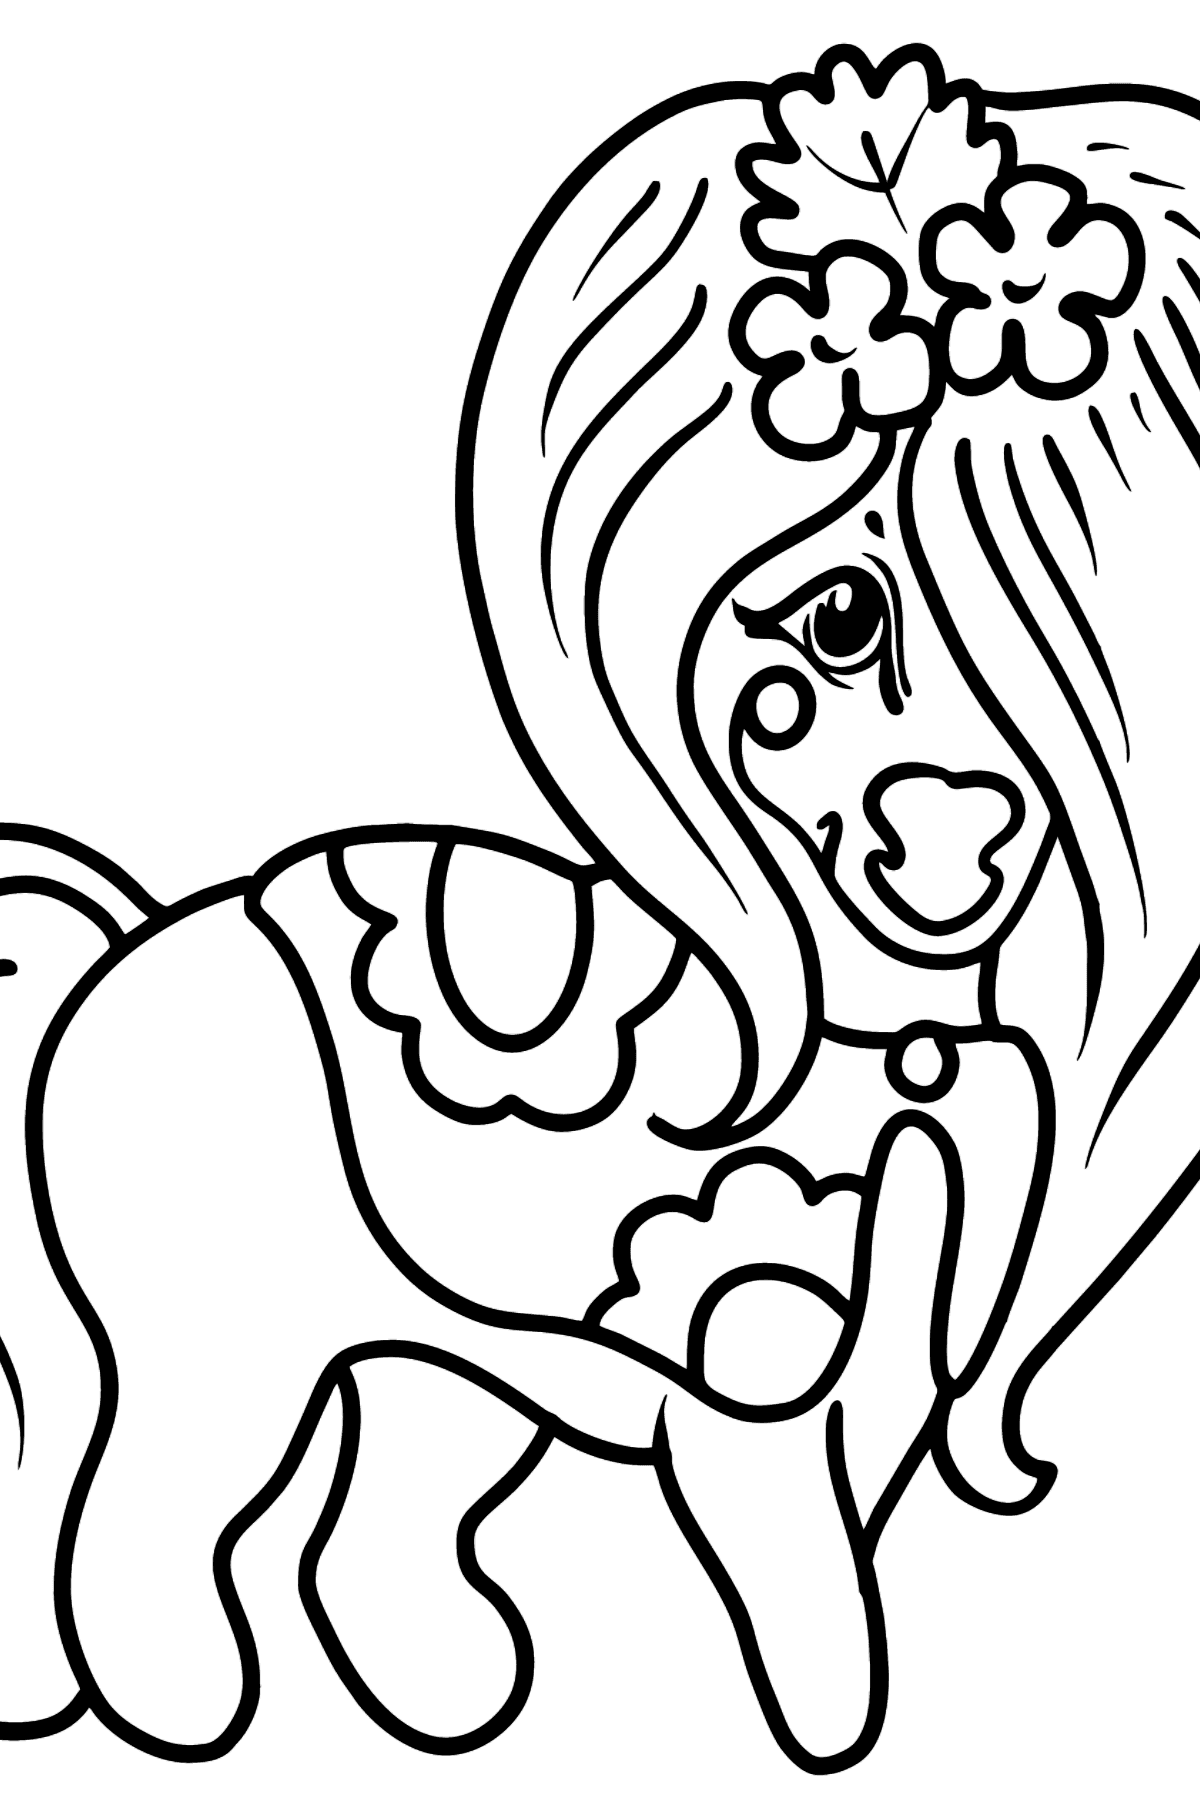 Beautiful Pony coloring page - Coloring Pages for Kids